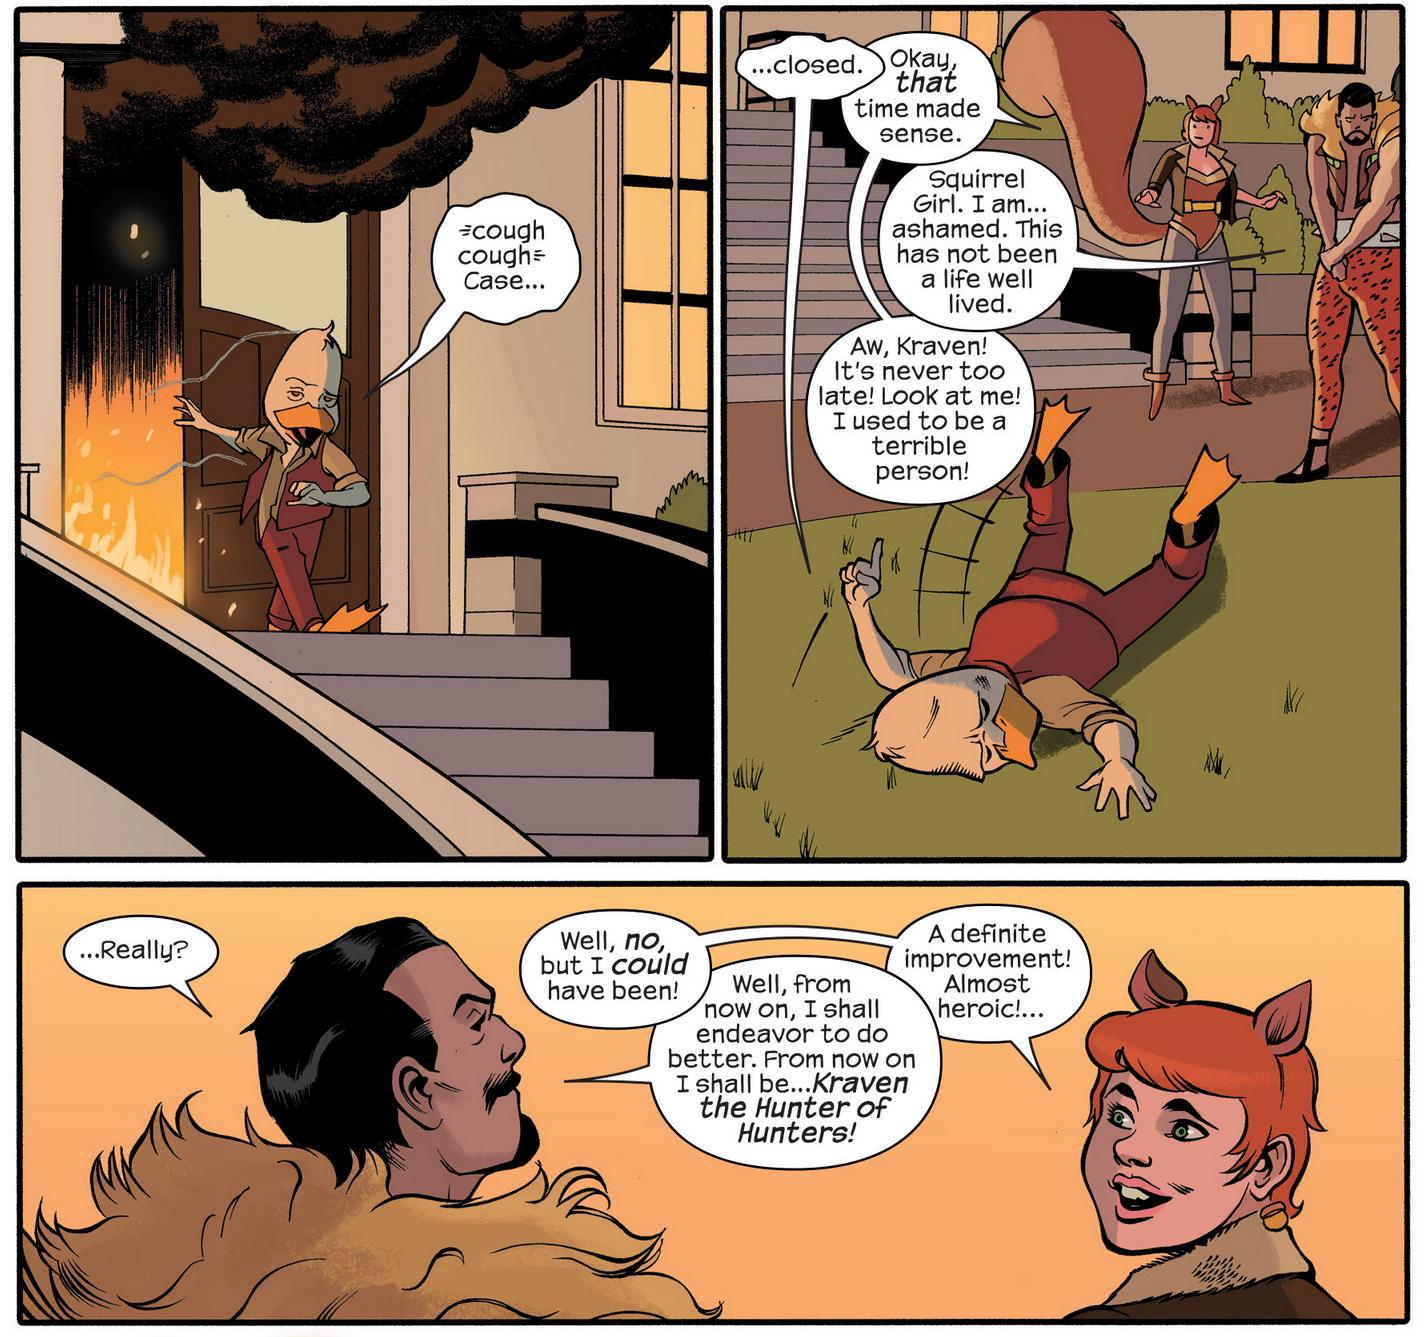 Kraven the Hunter finds a new direction in life in Howard the Duck Vol. 6 #6 "The 2016 Squirrel Girl/Howard the Duck 'Animal House' Crossover Part Two: Fight or Flight or Flightfight!" (2016), Marvel Comics. WOrds by Chip Zdarsky and Ryan North, art by Joe Quinones, Joe Rivera, Marc Deering, Jordan Gibson, and Travis Lanham.